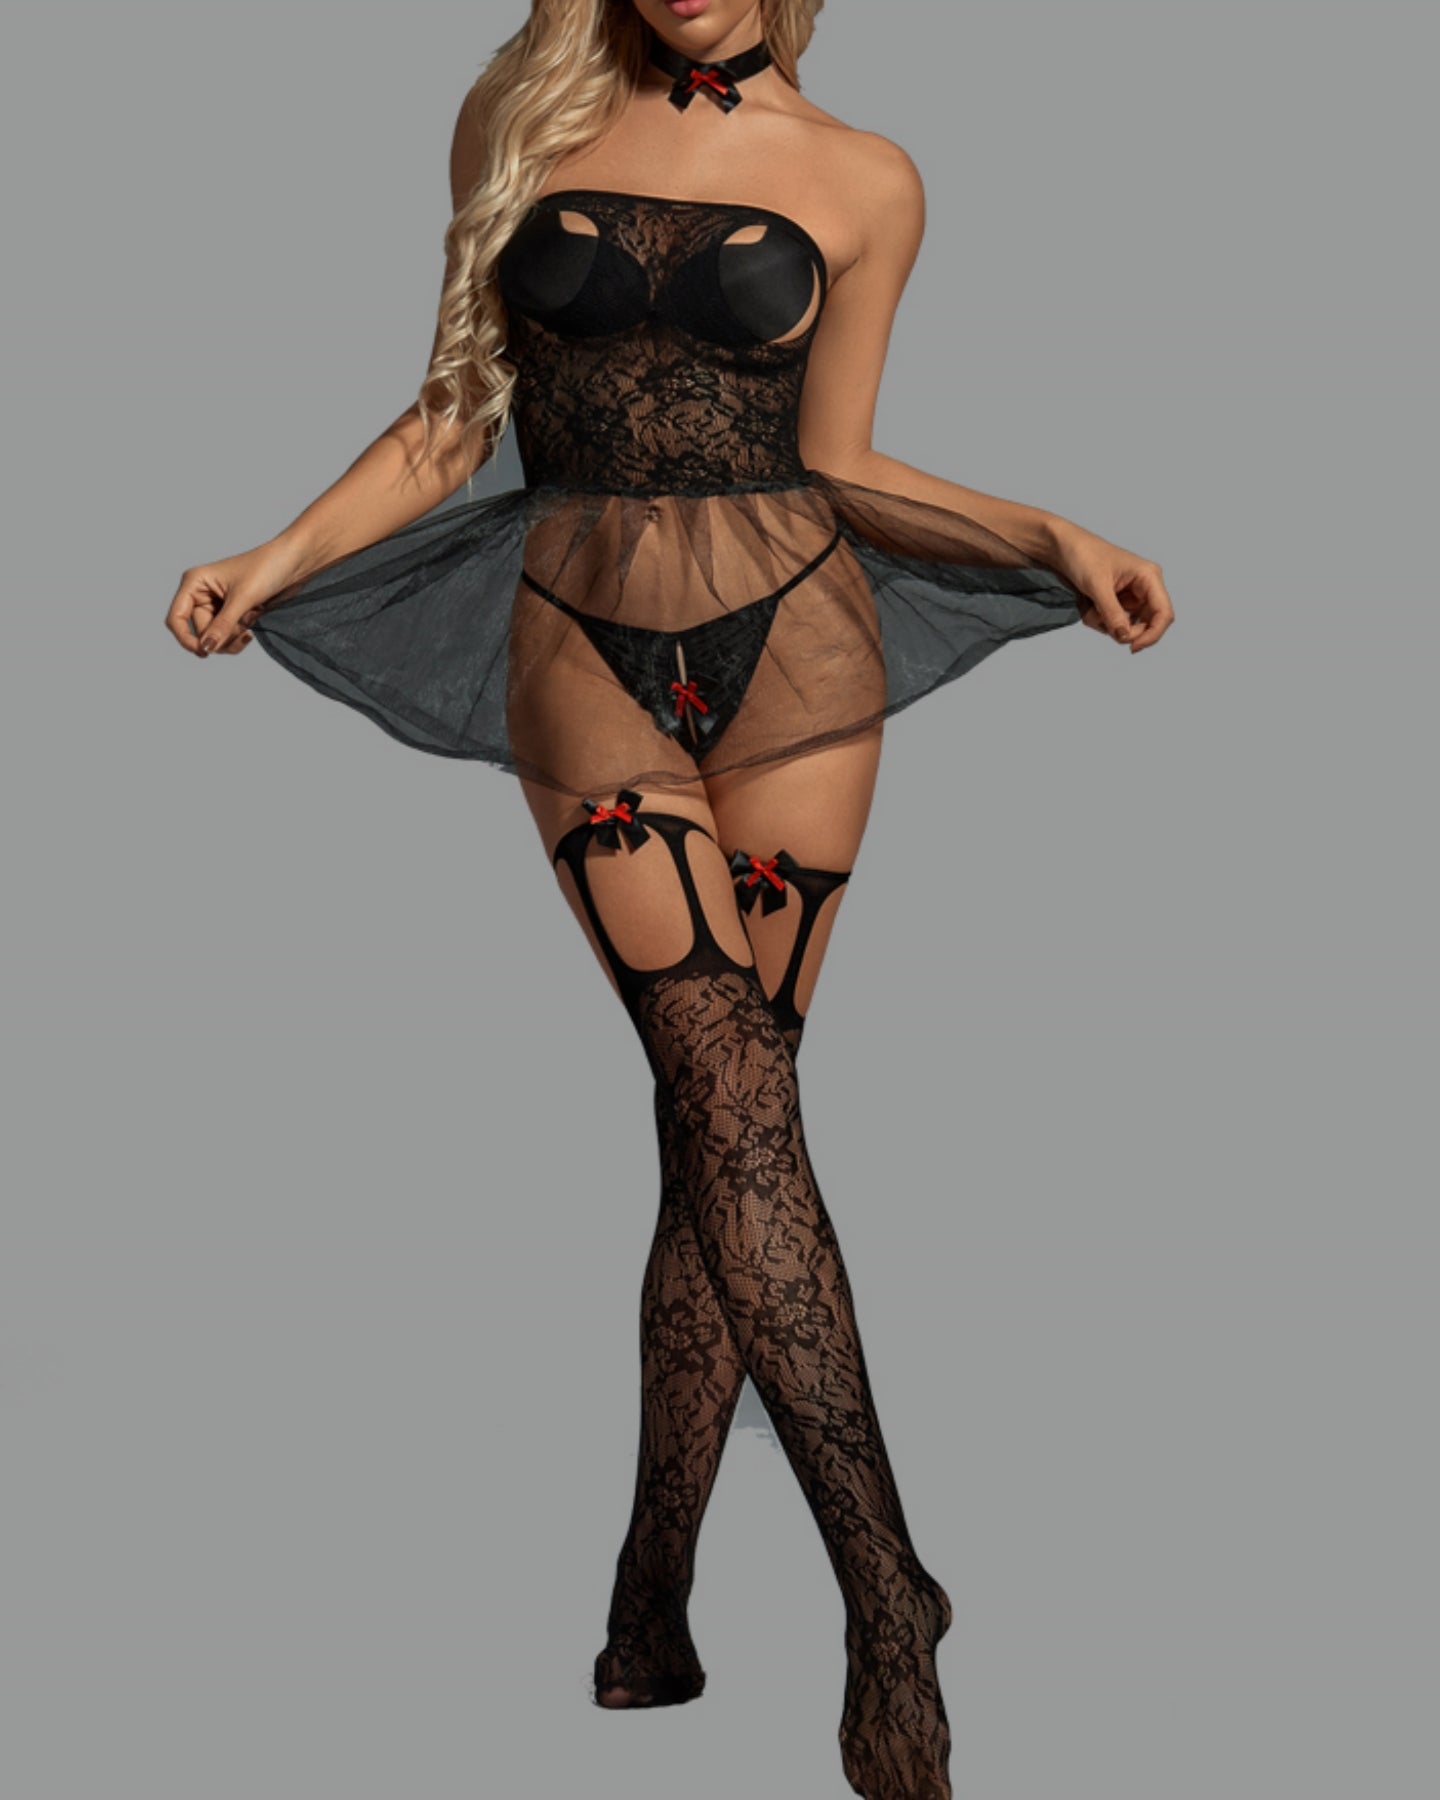 Bowknot sexy lingerie temptation one-piece mesh dress lace skirt support suspenders pure desire stockings three-piece set